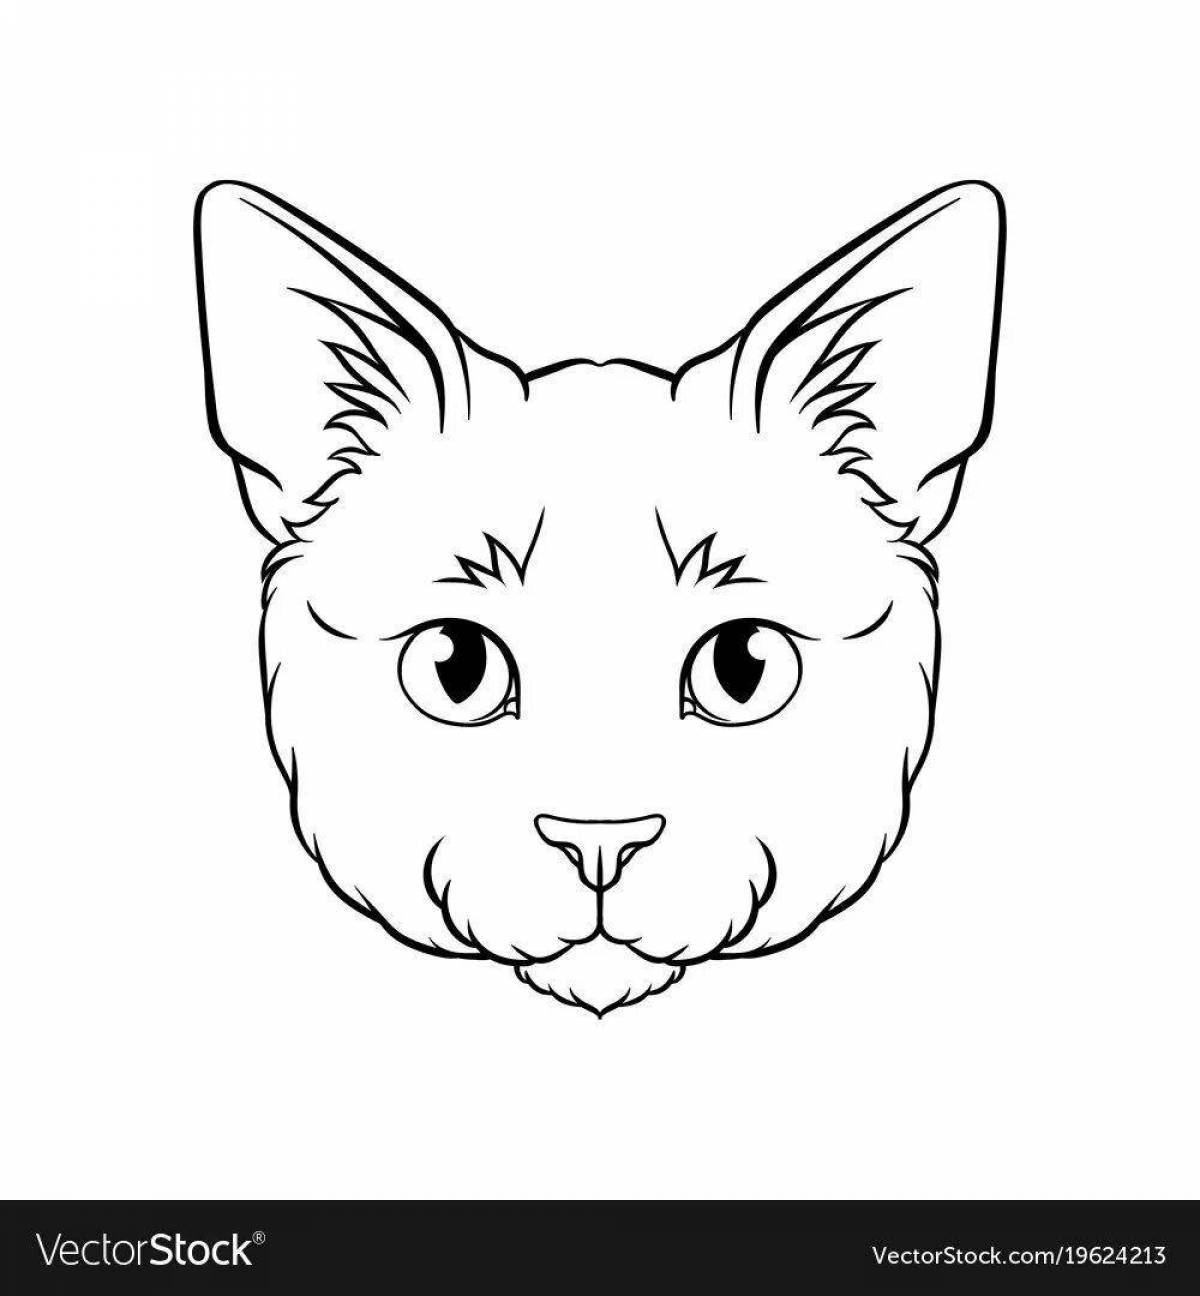 Colouring bright cat face